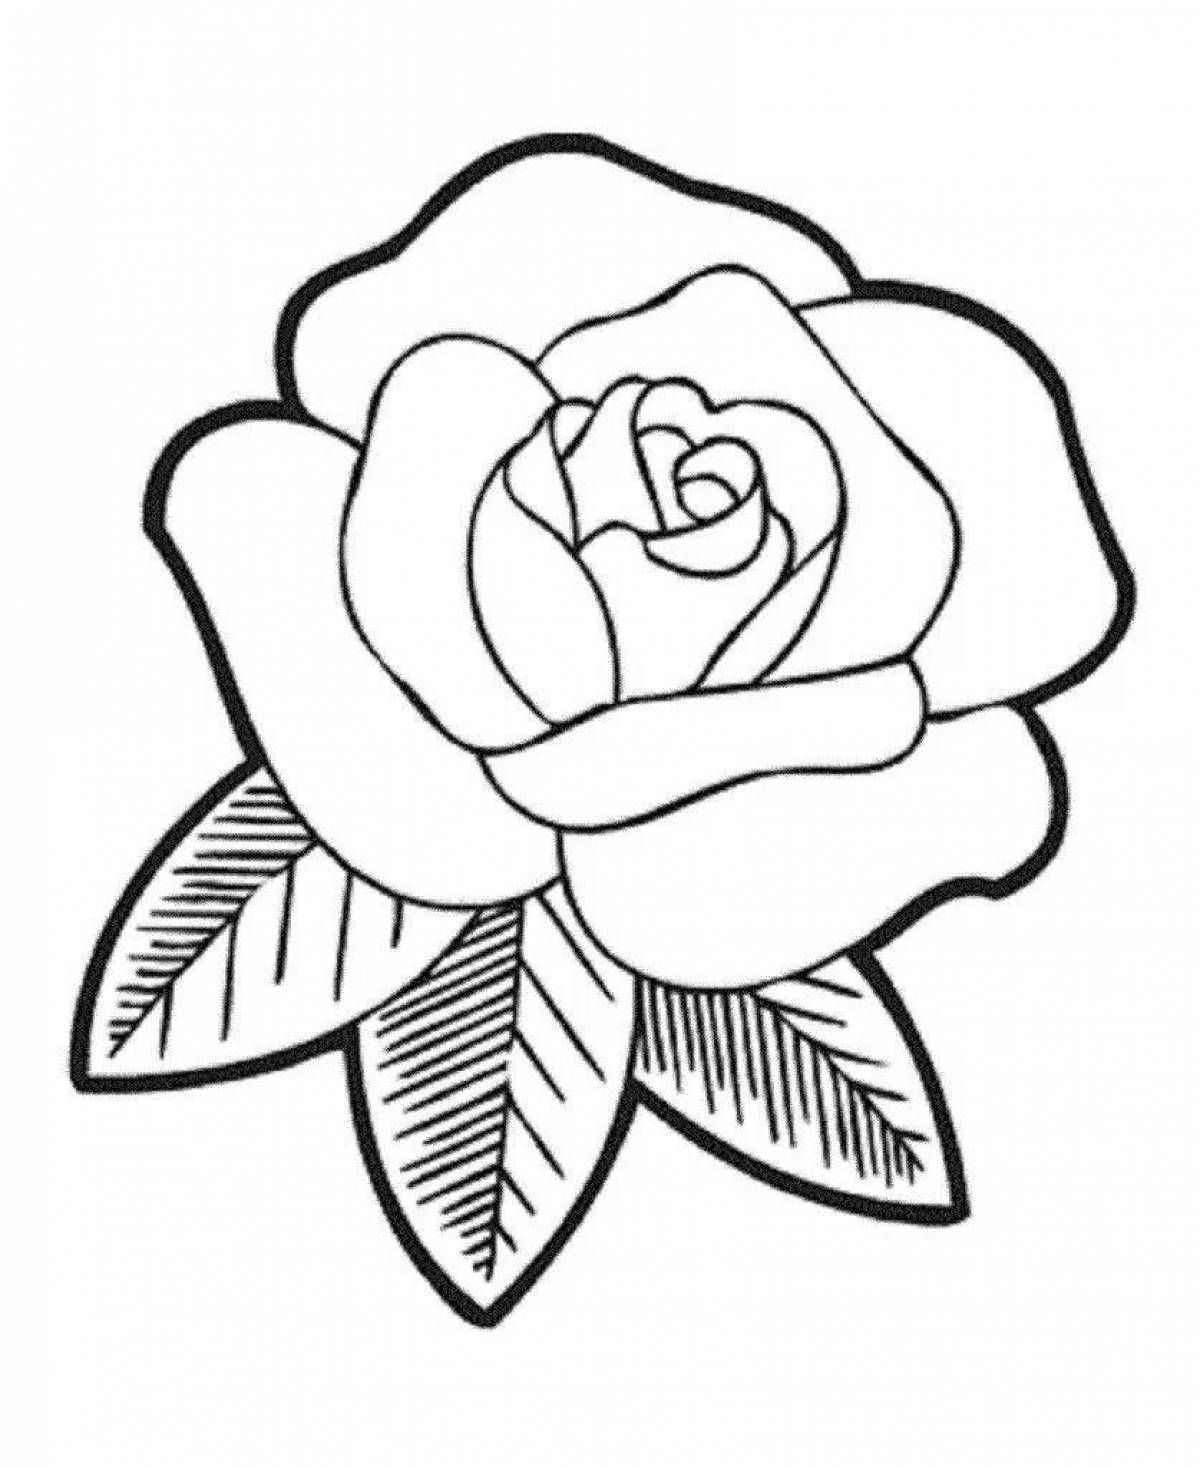 Delicate coloring picture of a rose